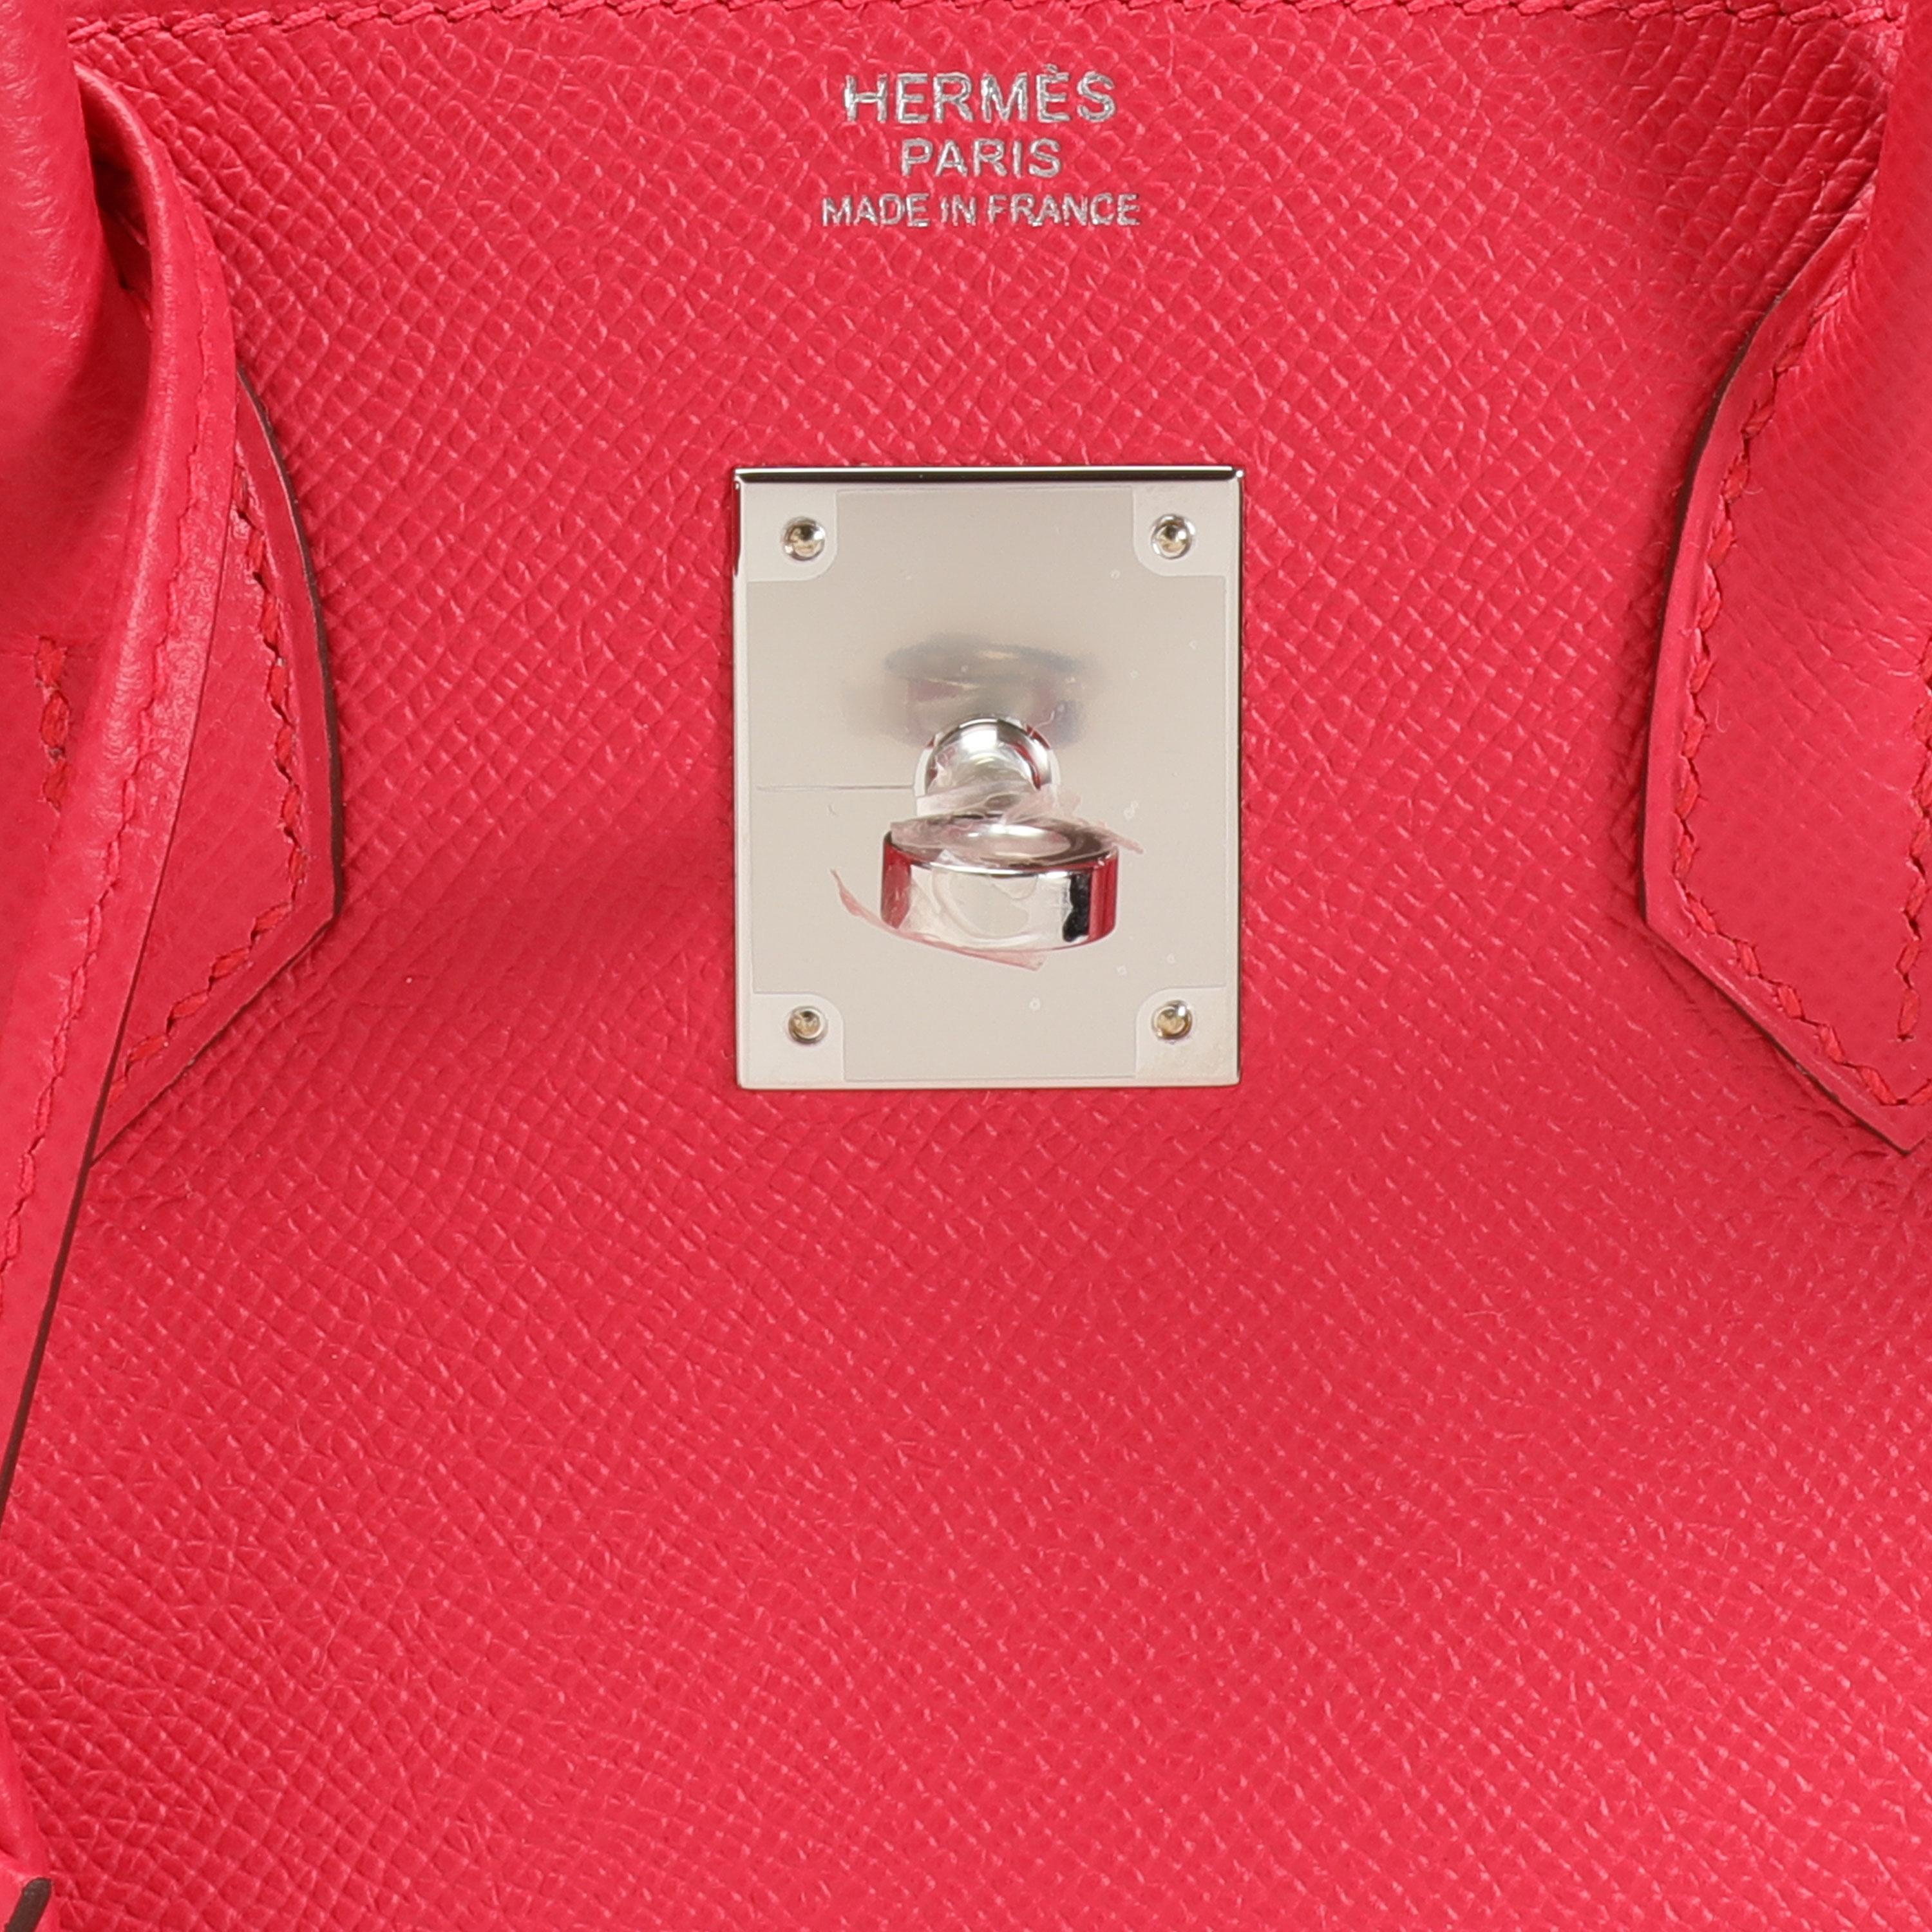 Listing Title: Hermès Rose Extreme Epsom Birkin 30 with Palladium Hardware
SKU: 106470

Condition: New without tags (1500)
Condition Description: Pretty in pink. This Hermès Birkin from 2019 is crafted in Epsom Leather in the eye-catching Rose